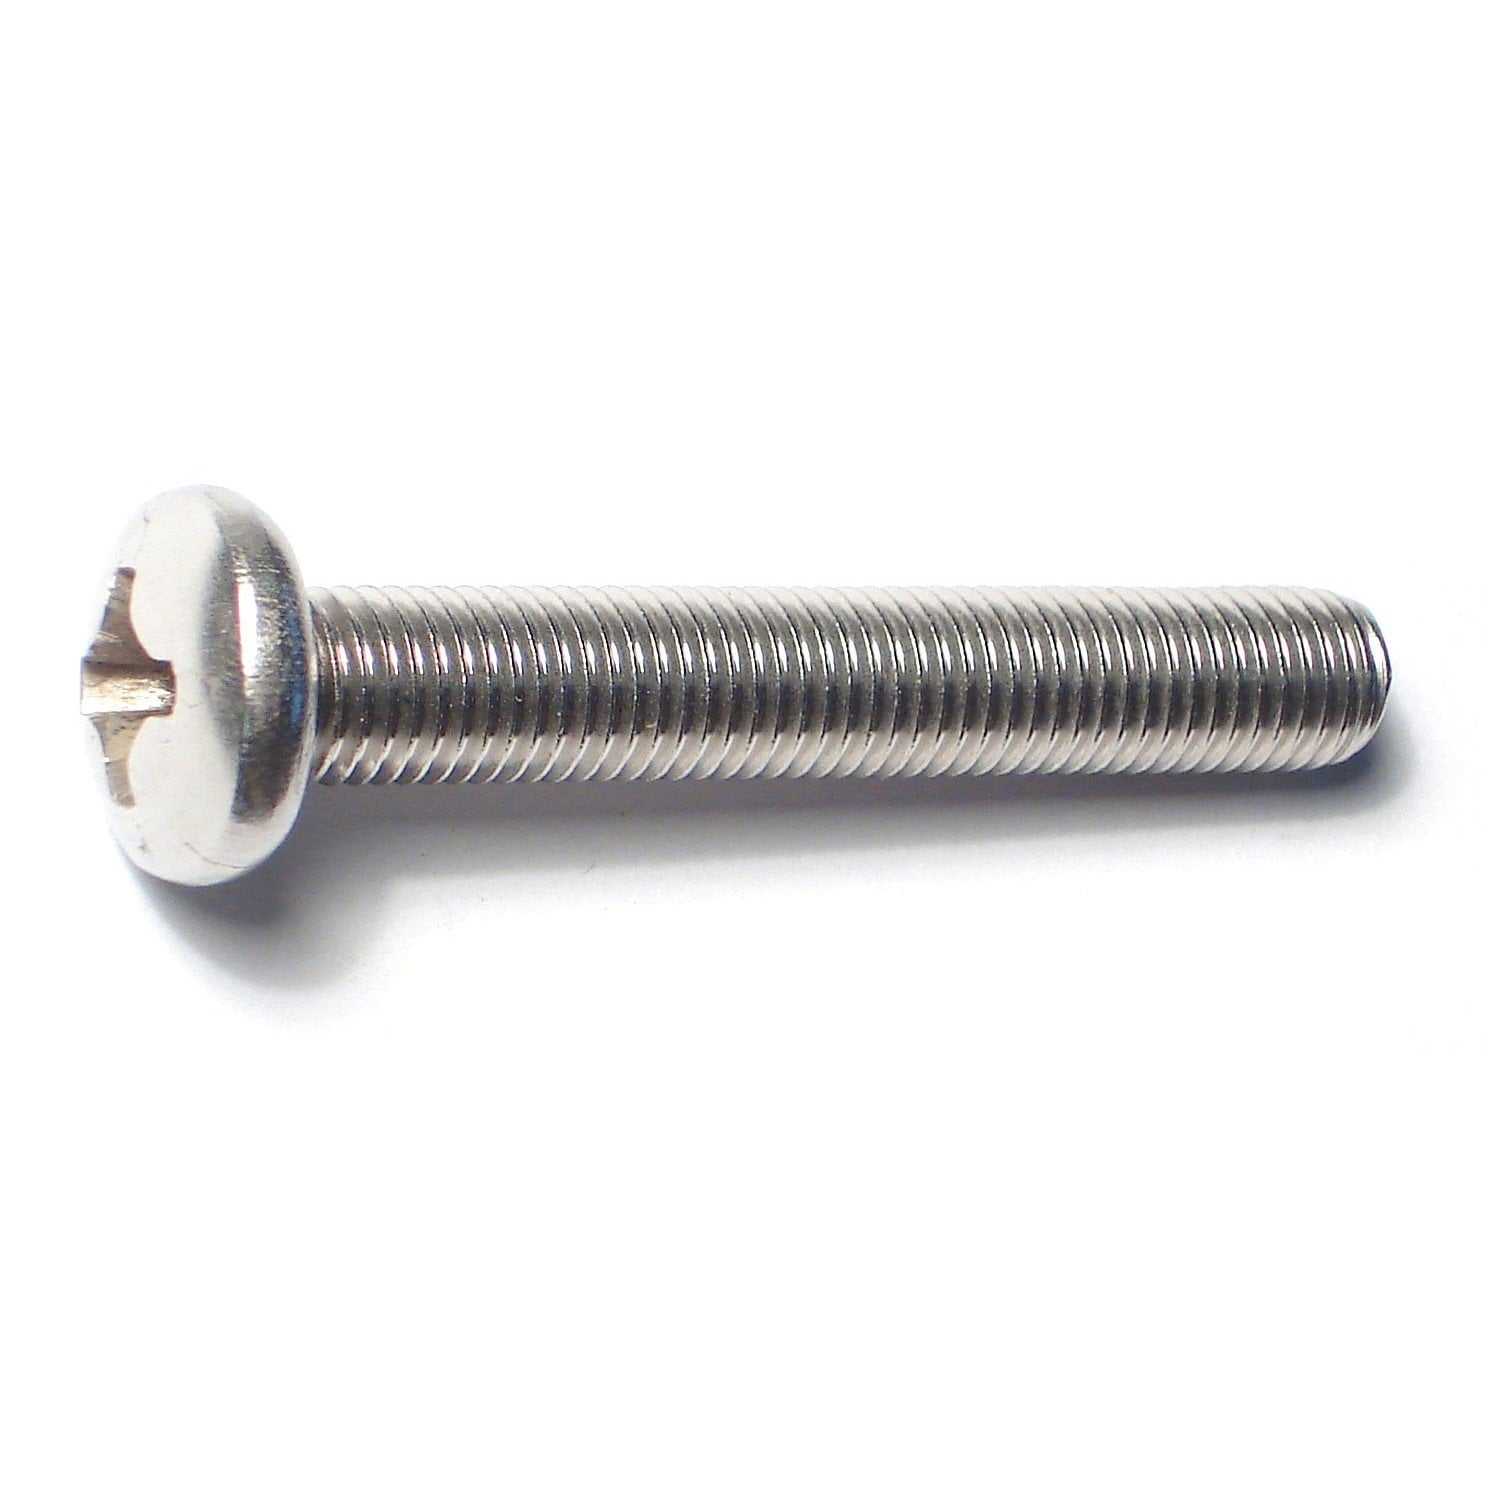 5/16-18 x 2" Phillips Oval Head Machine Screws Stainless Steel 18-8 Qty 50 